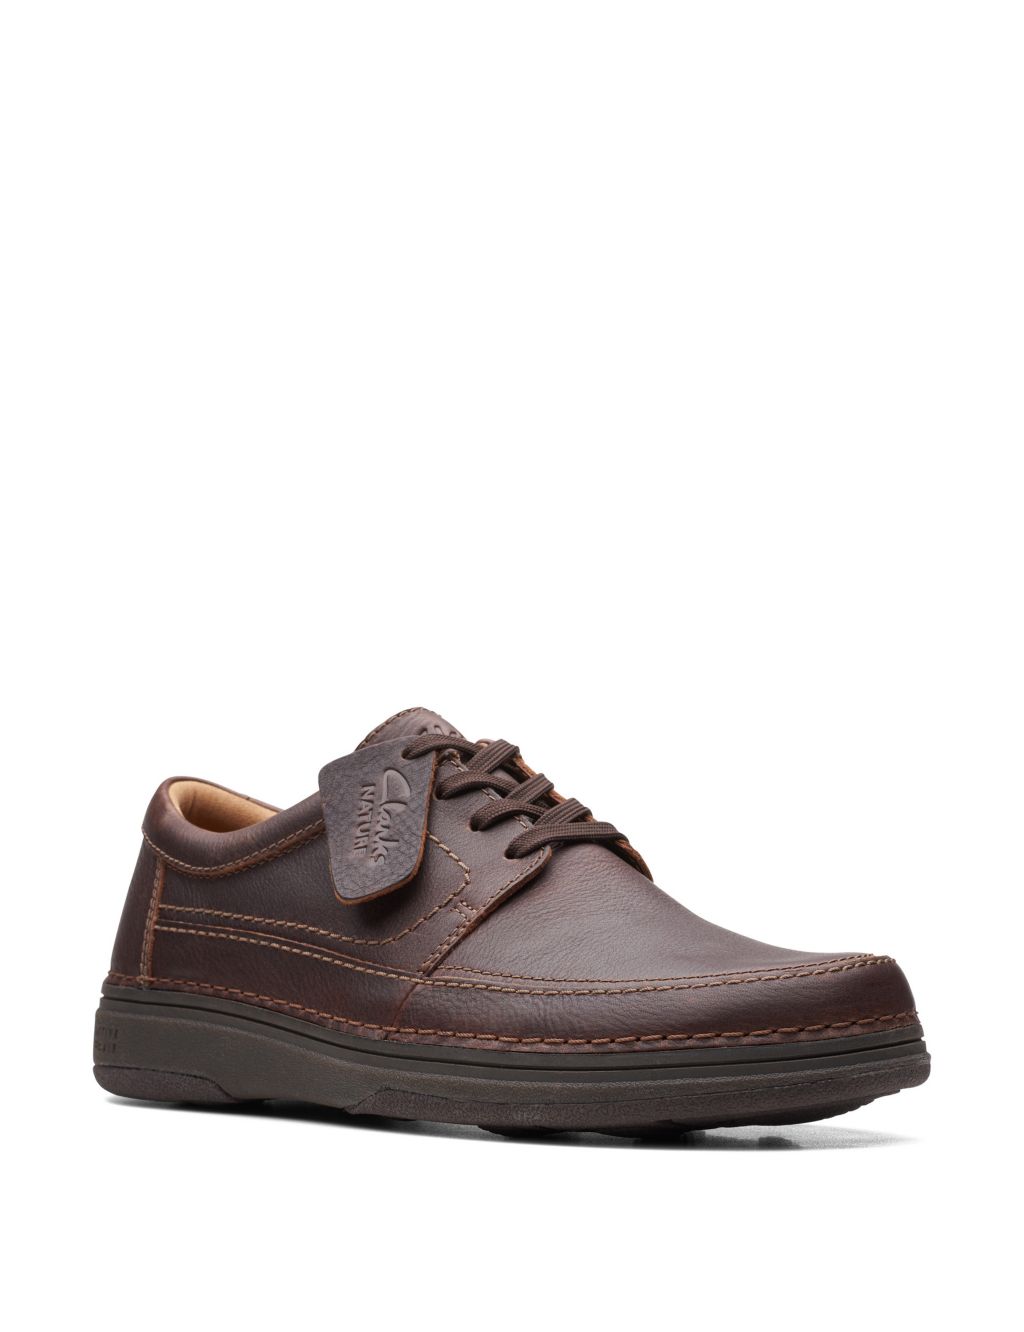 Leather Casual Shoes image 2